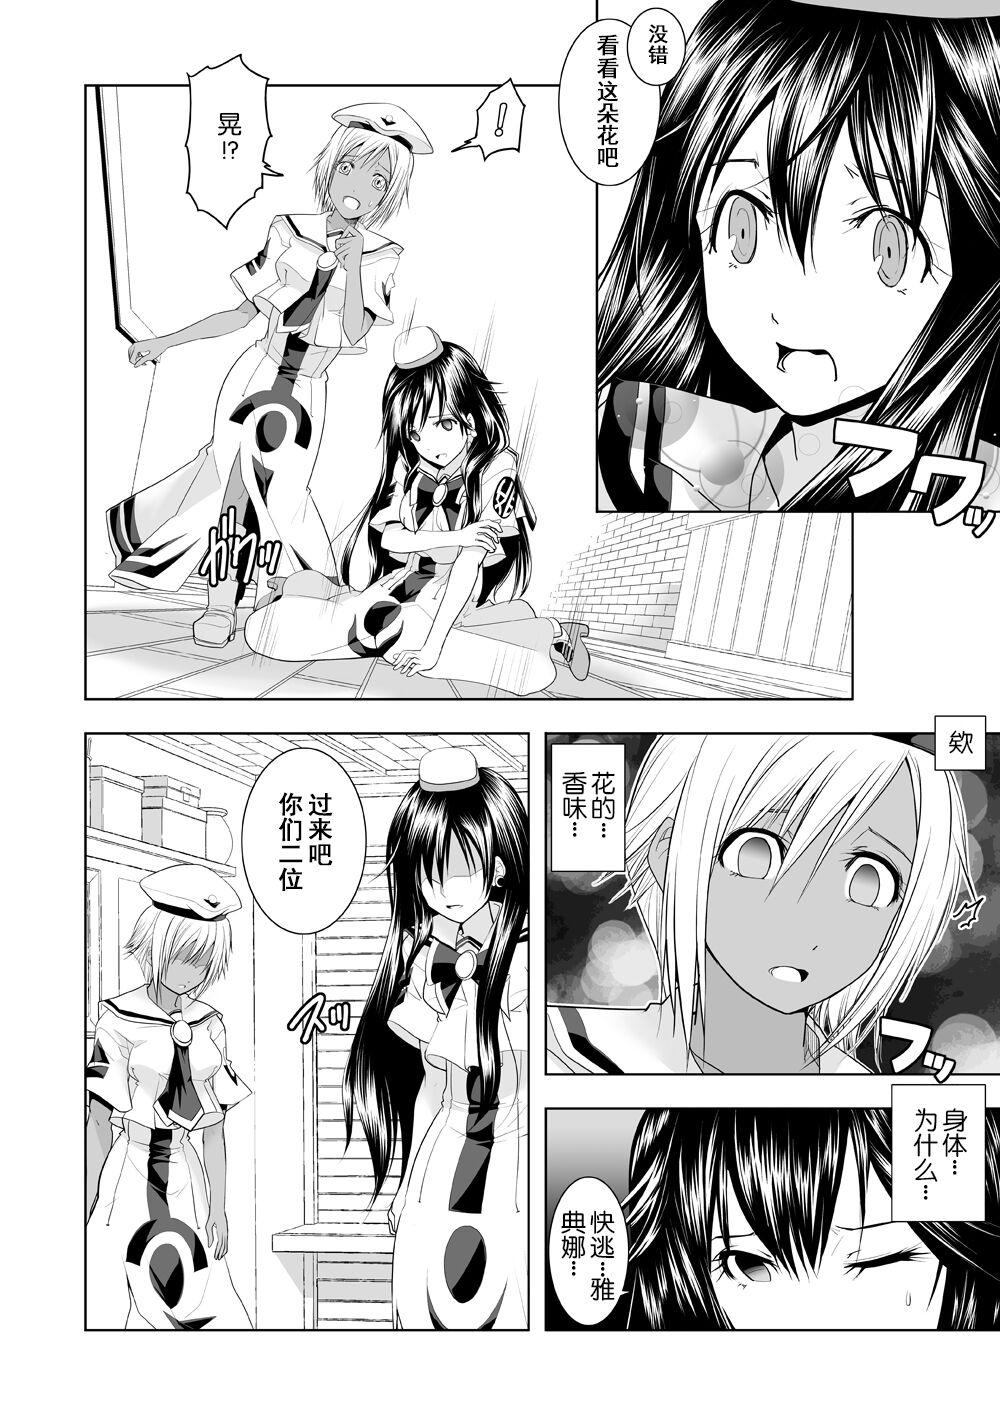 Pussyeating AR*A Mind-control Manga - Aria Mofos - Page 8